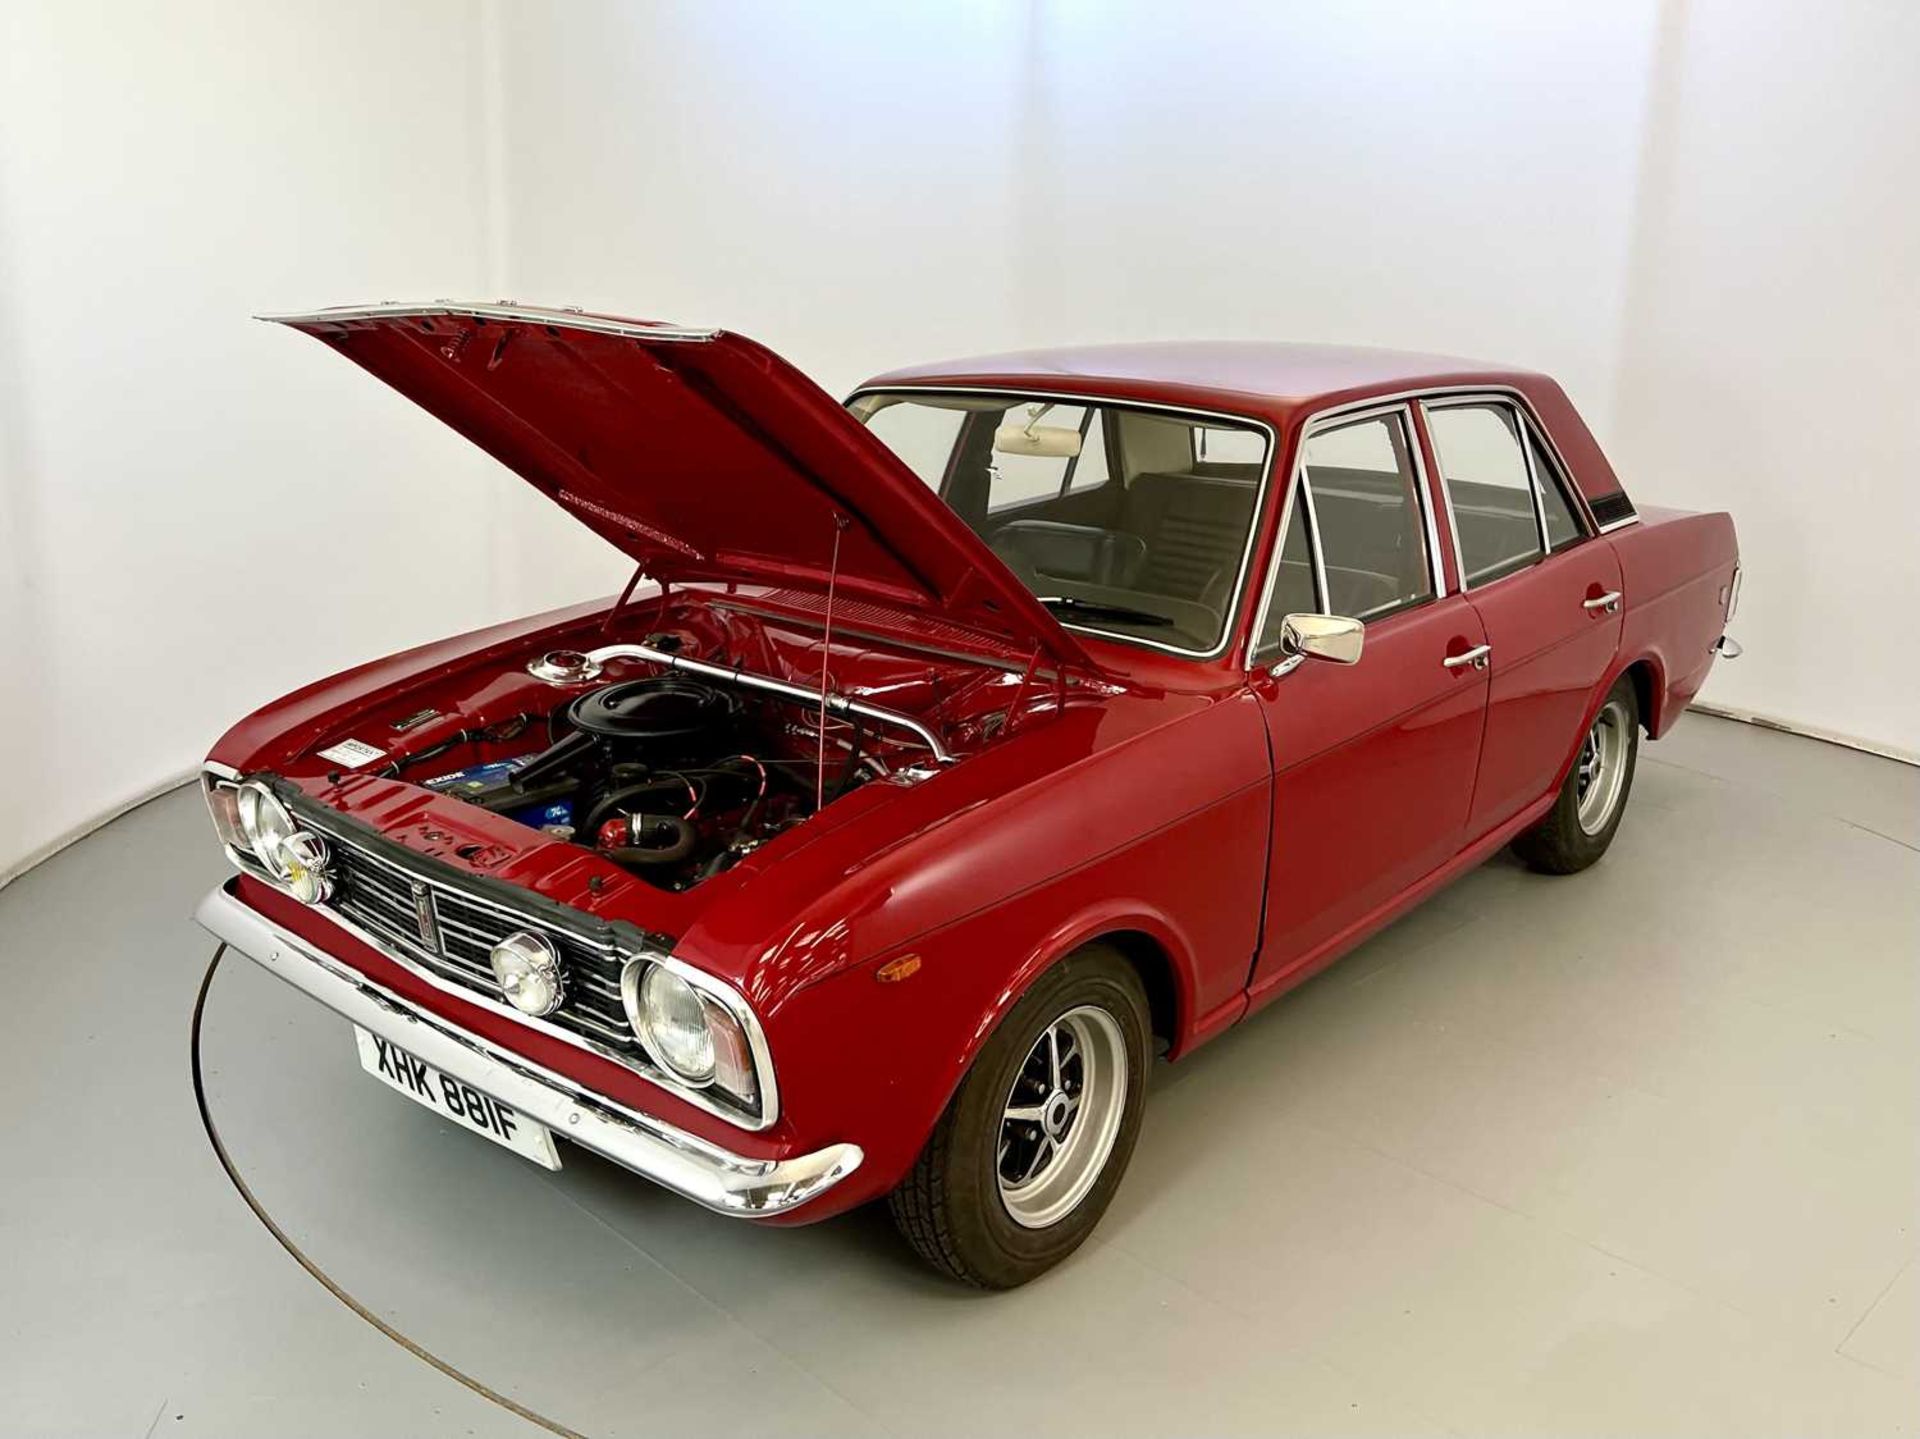 1967 Ford Cortina 1600GT - Image 36 of 37